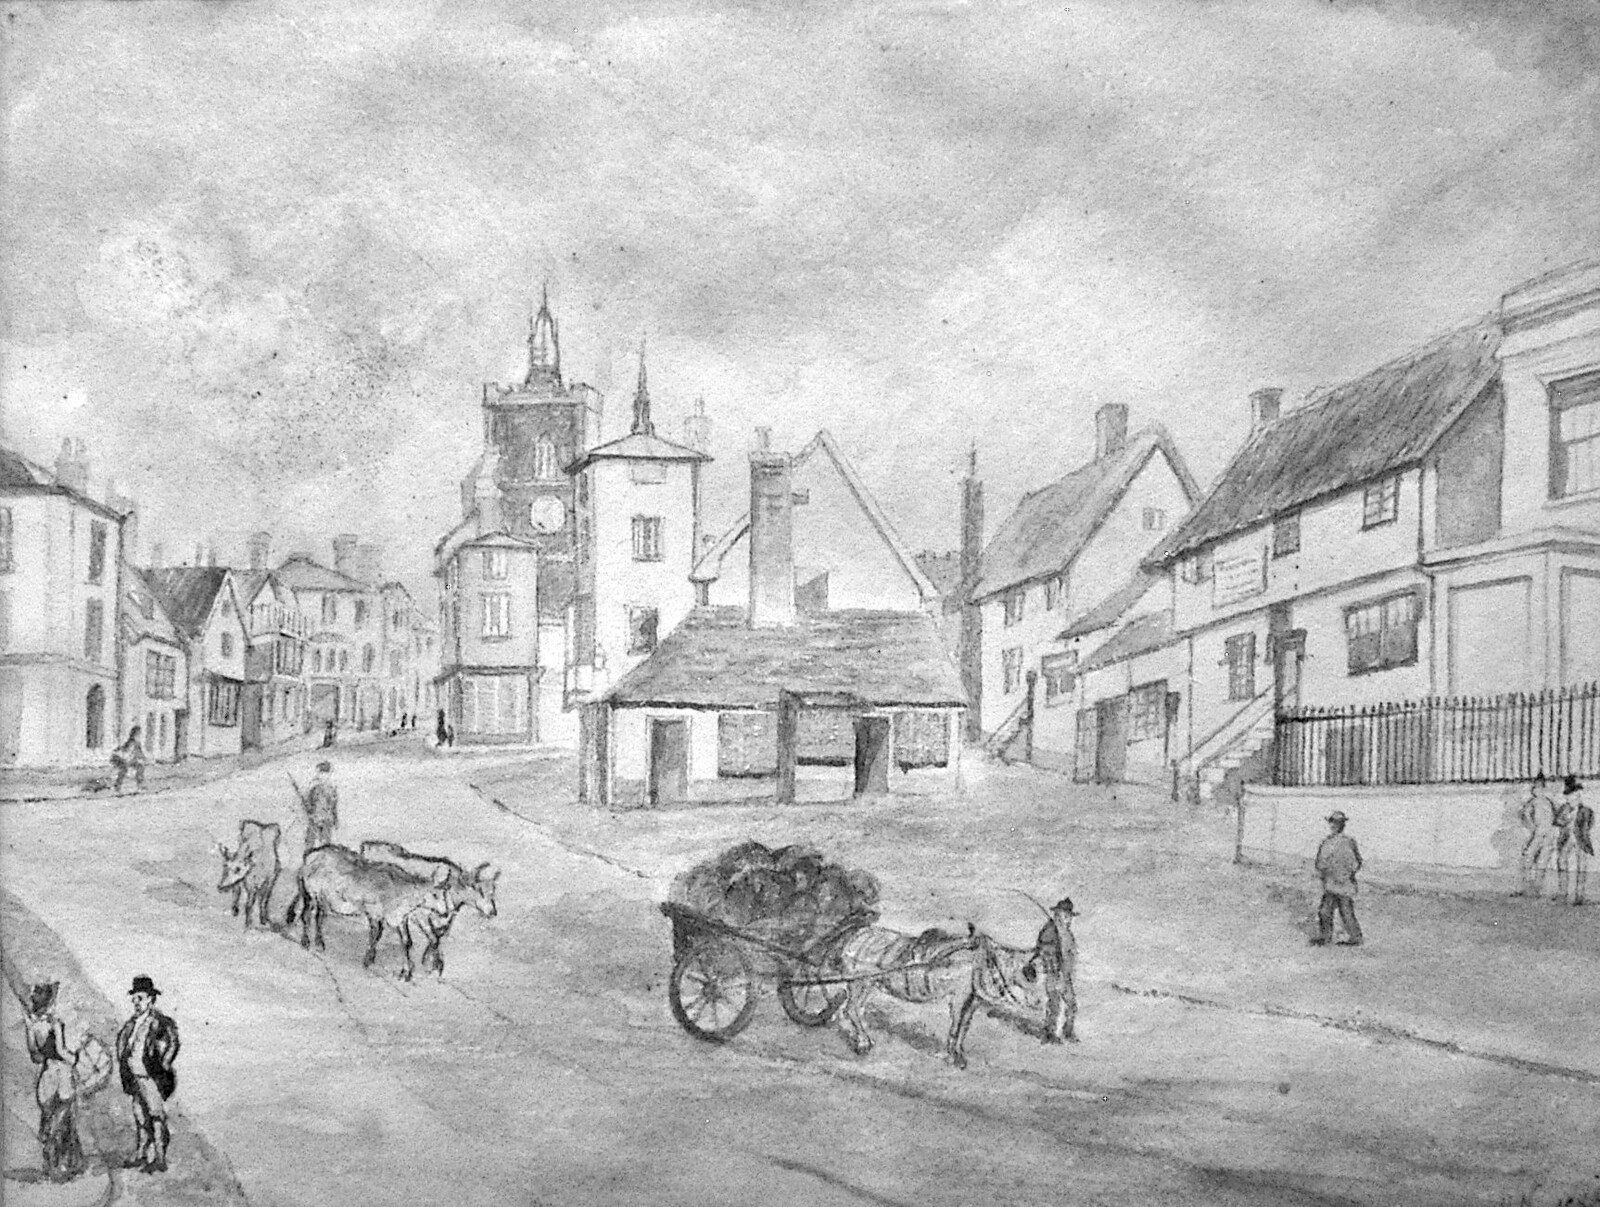 An 1860s-ish sketch of Diss's market place from A Portrait of Hopgoods: Gentlemen's Outfitters, Diss, Norfolk - 4th January 2006